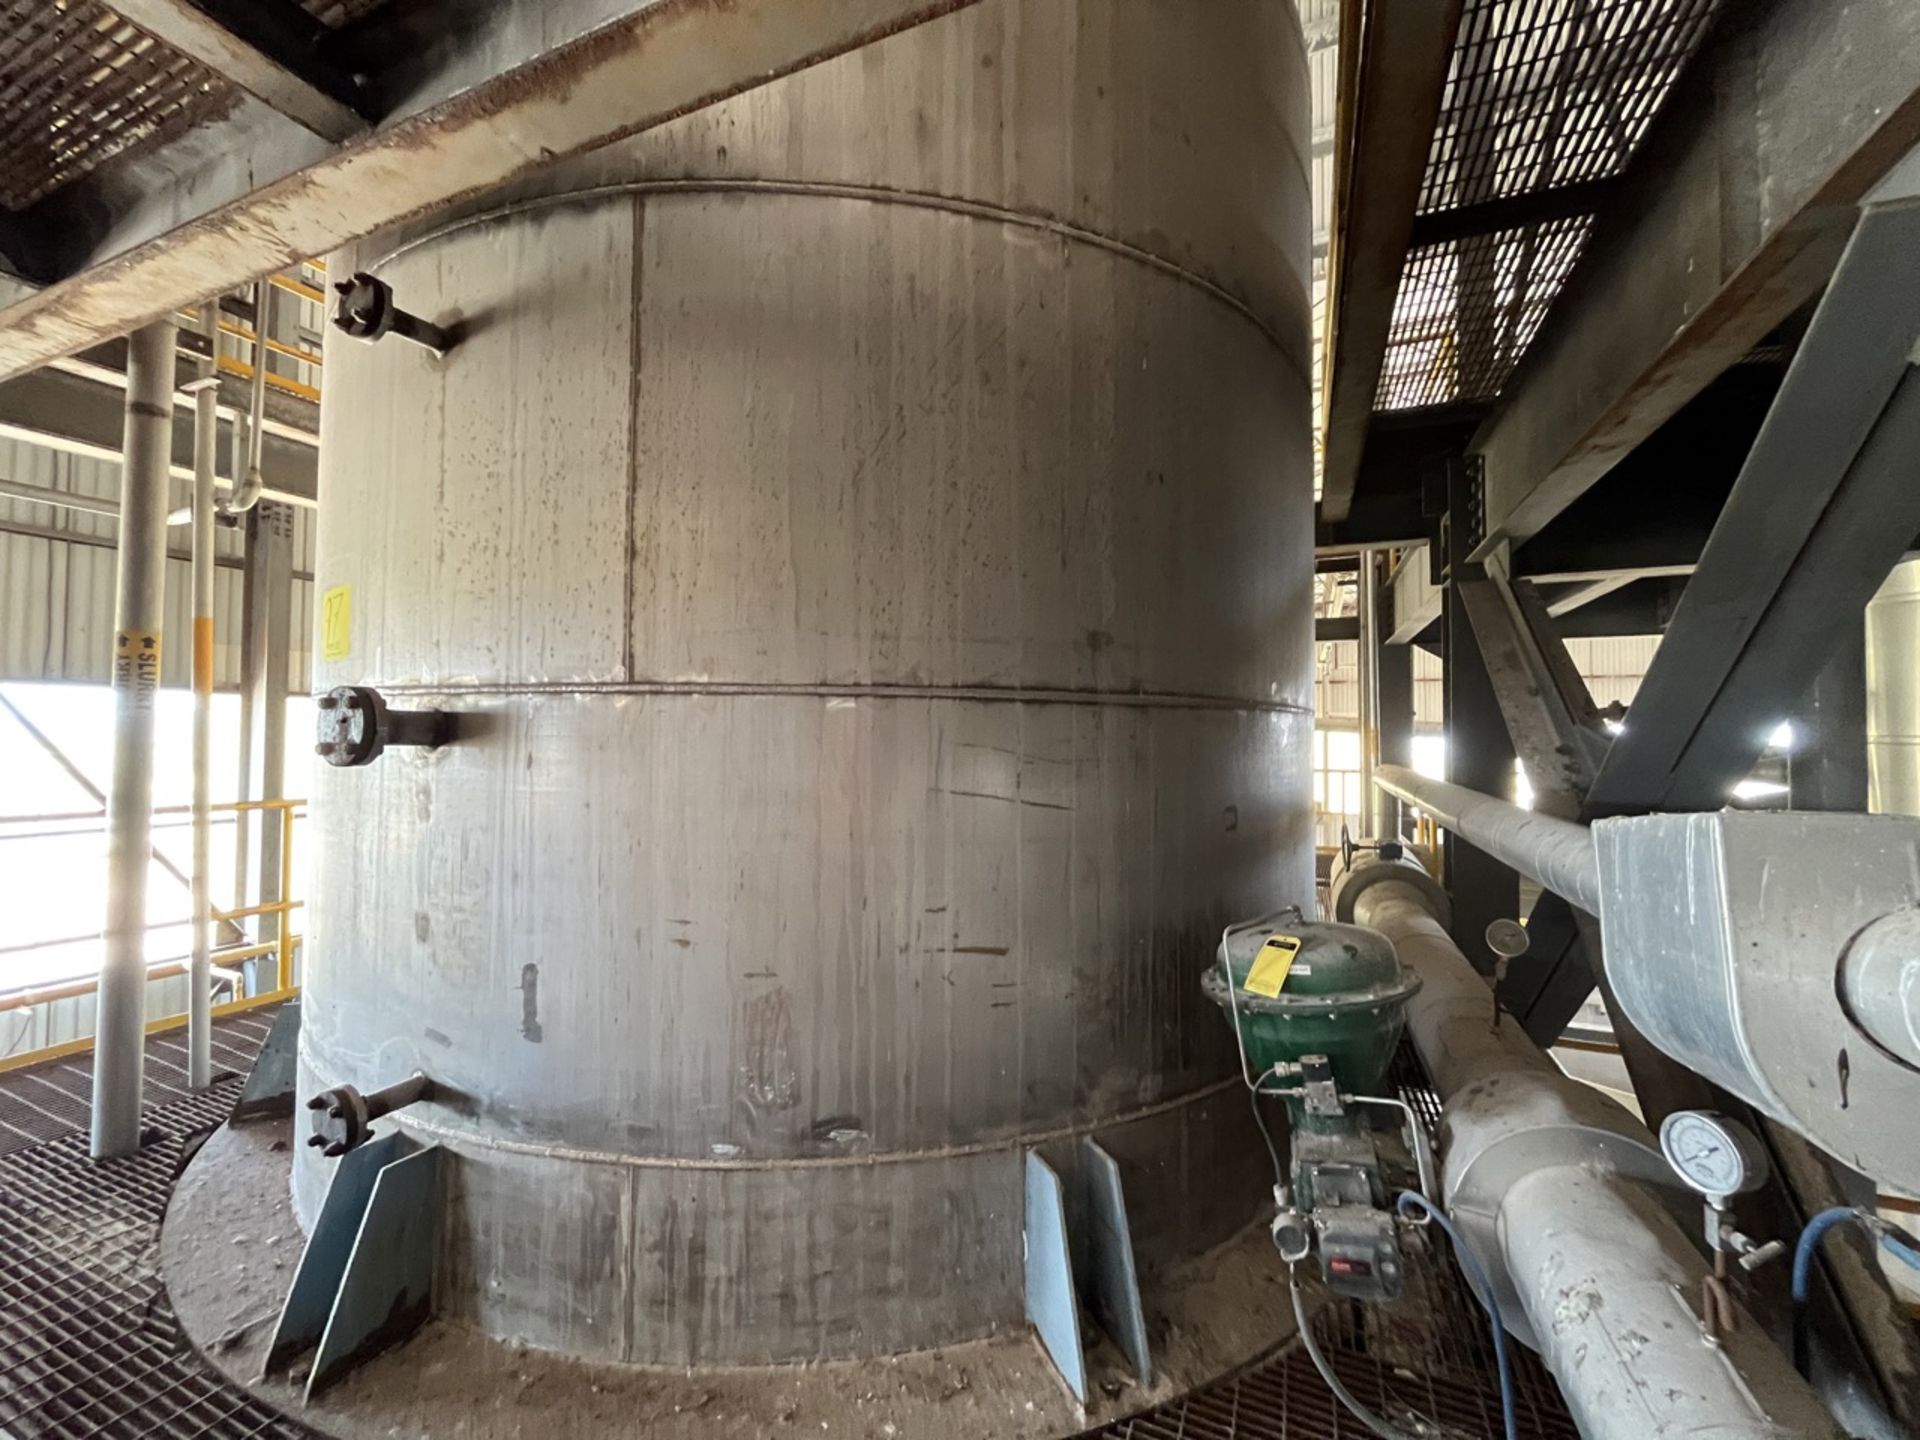 Conical storage tank with stainless steel toriesferica lid measures approximately 4.30 meters in di - Image 20 of 37